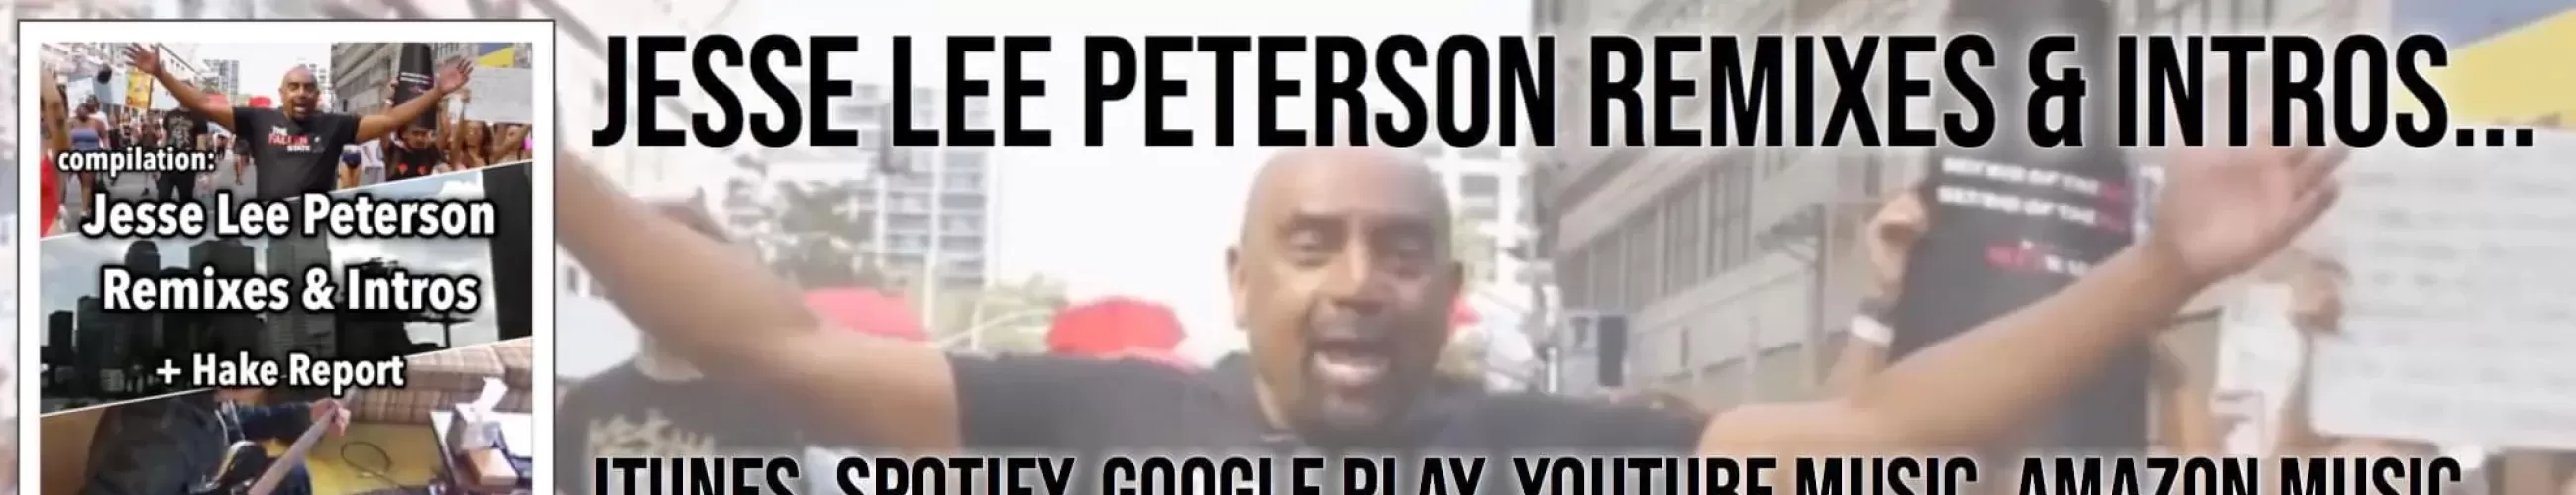 Jesse Lee Peterson Show "Stand Up" Remix